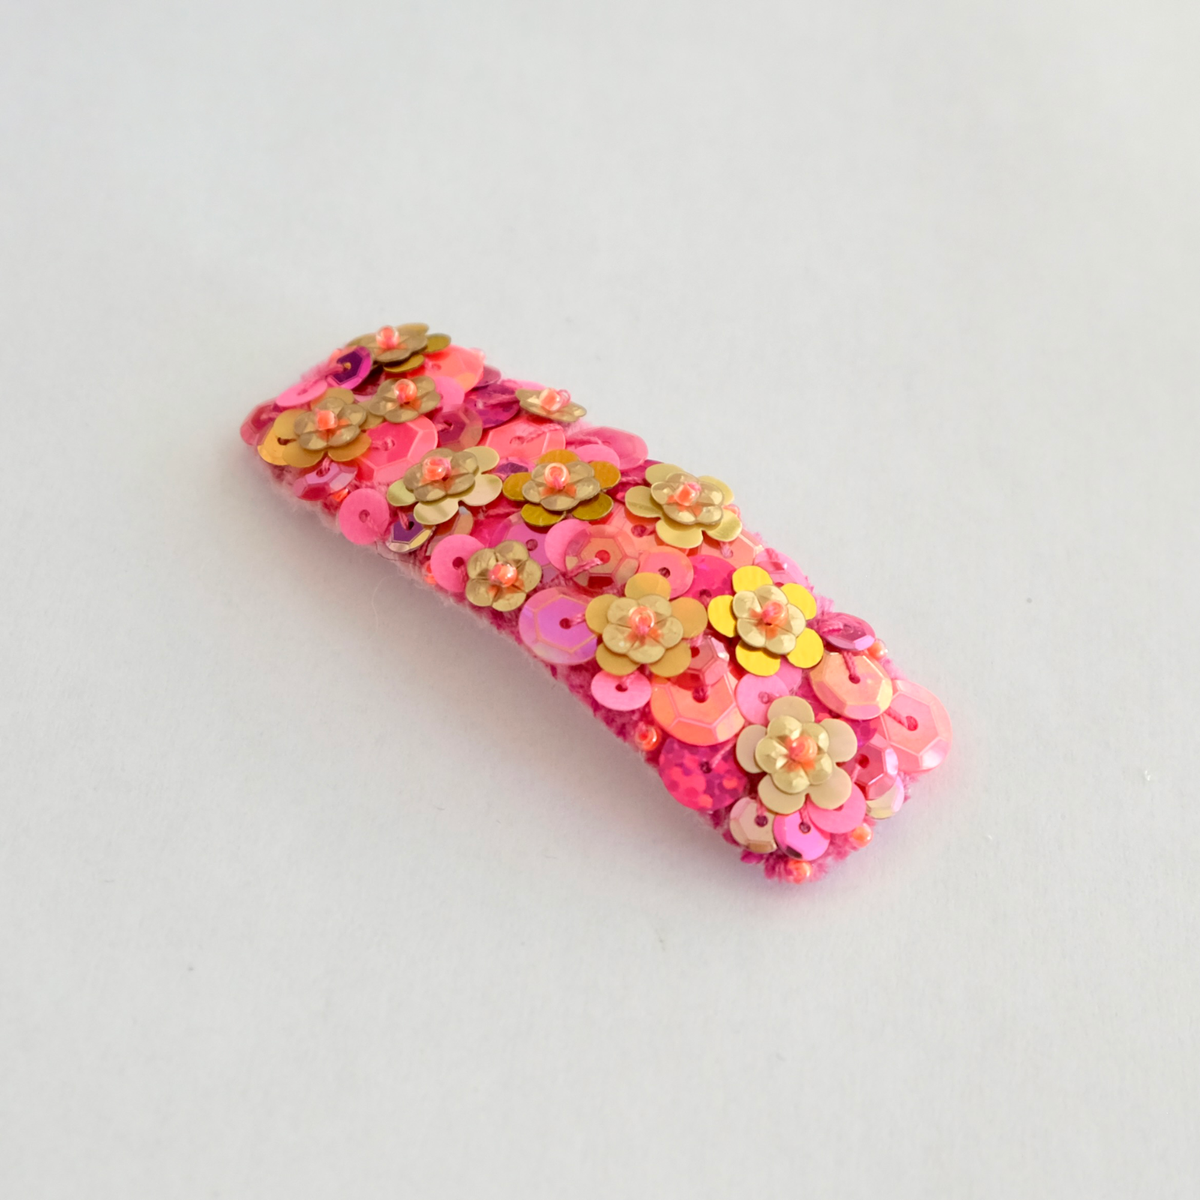 Our Sienna hair clip, large and gorgeously embellished with gold, pink and orange sequins.